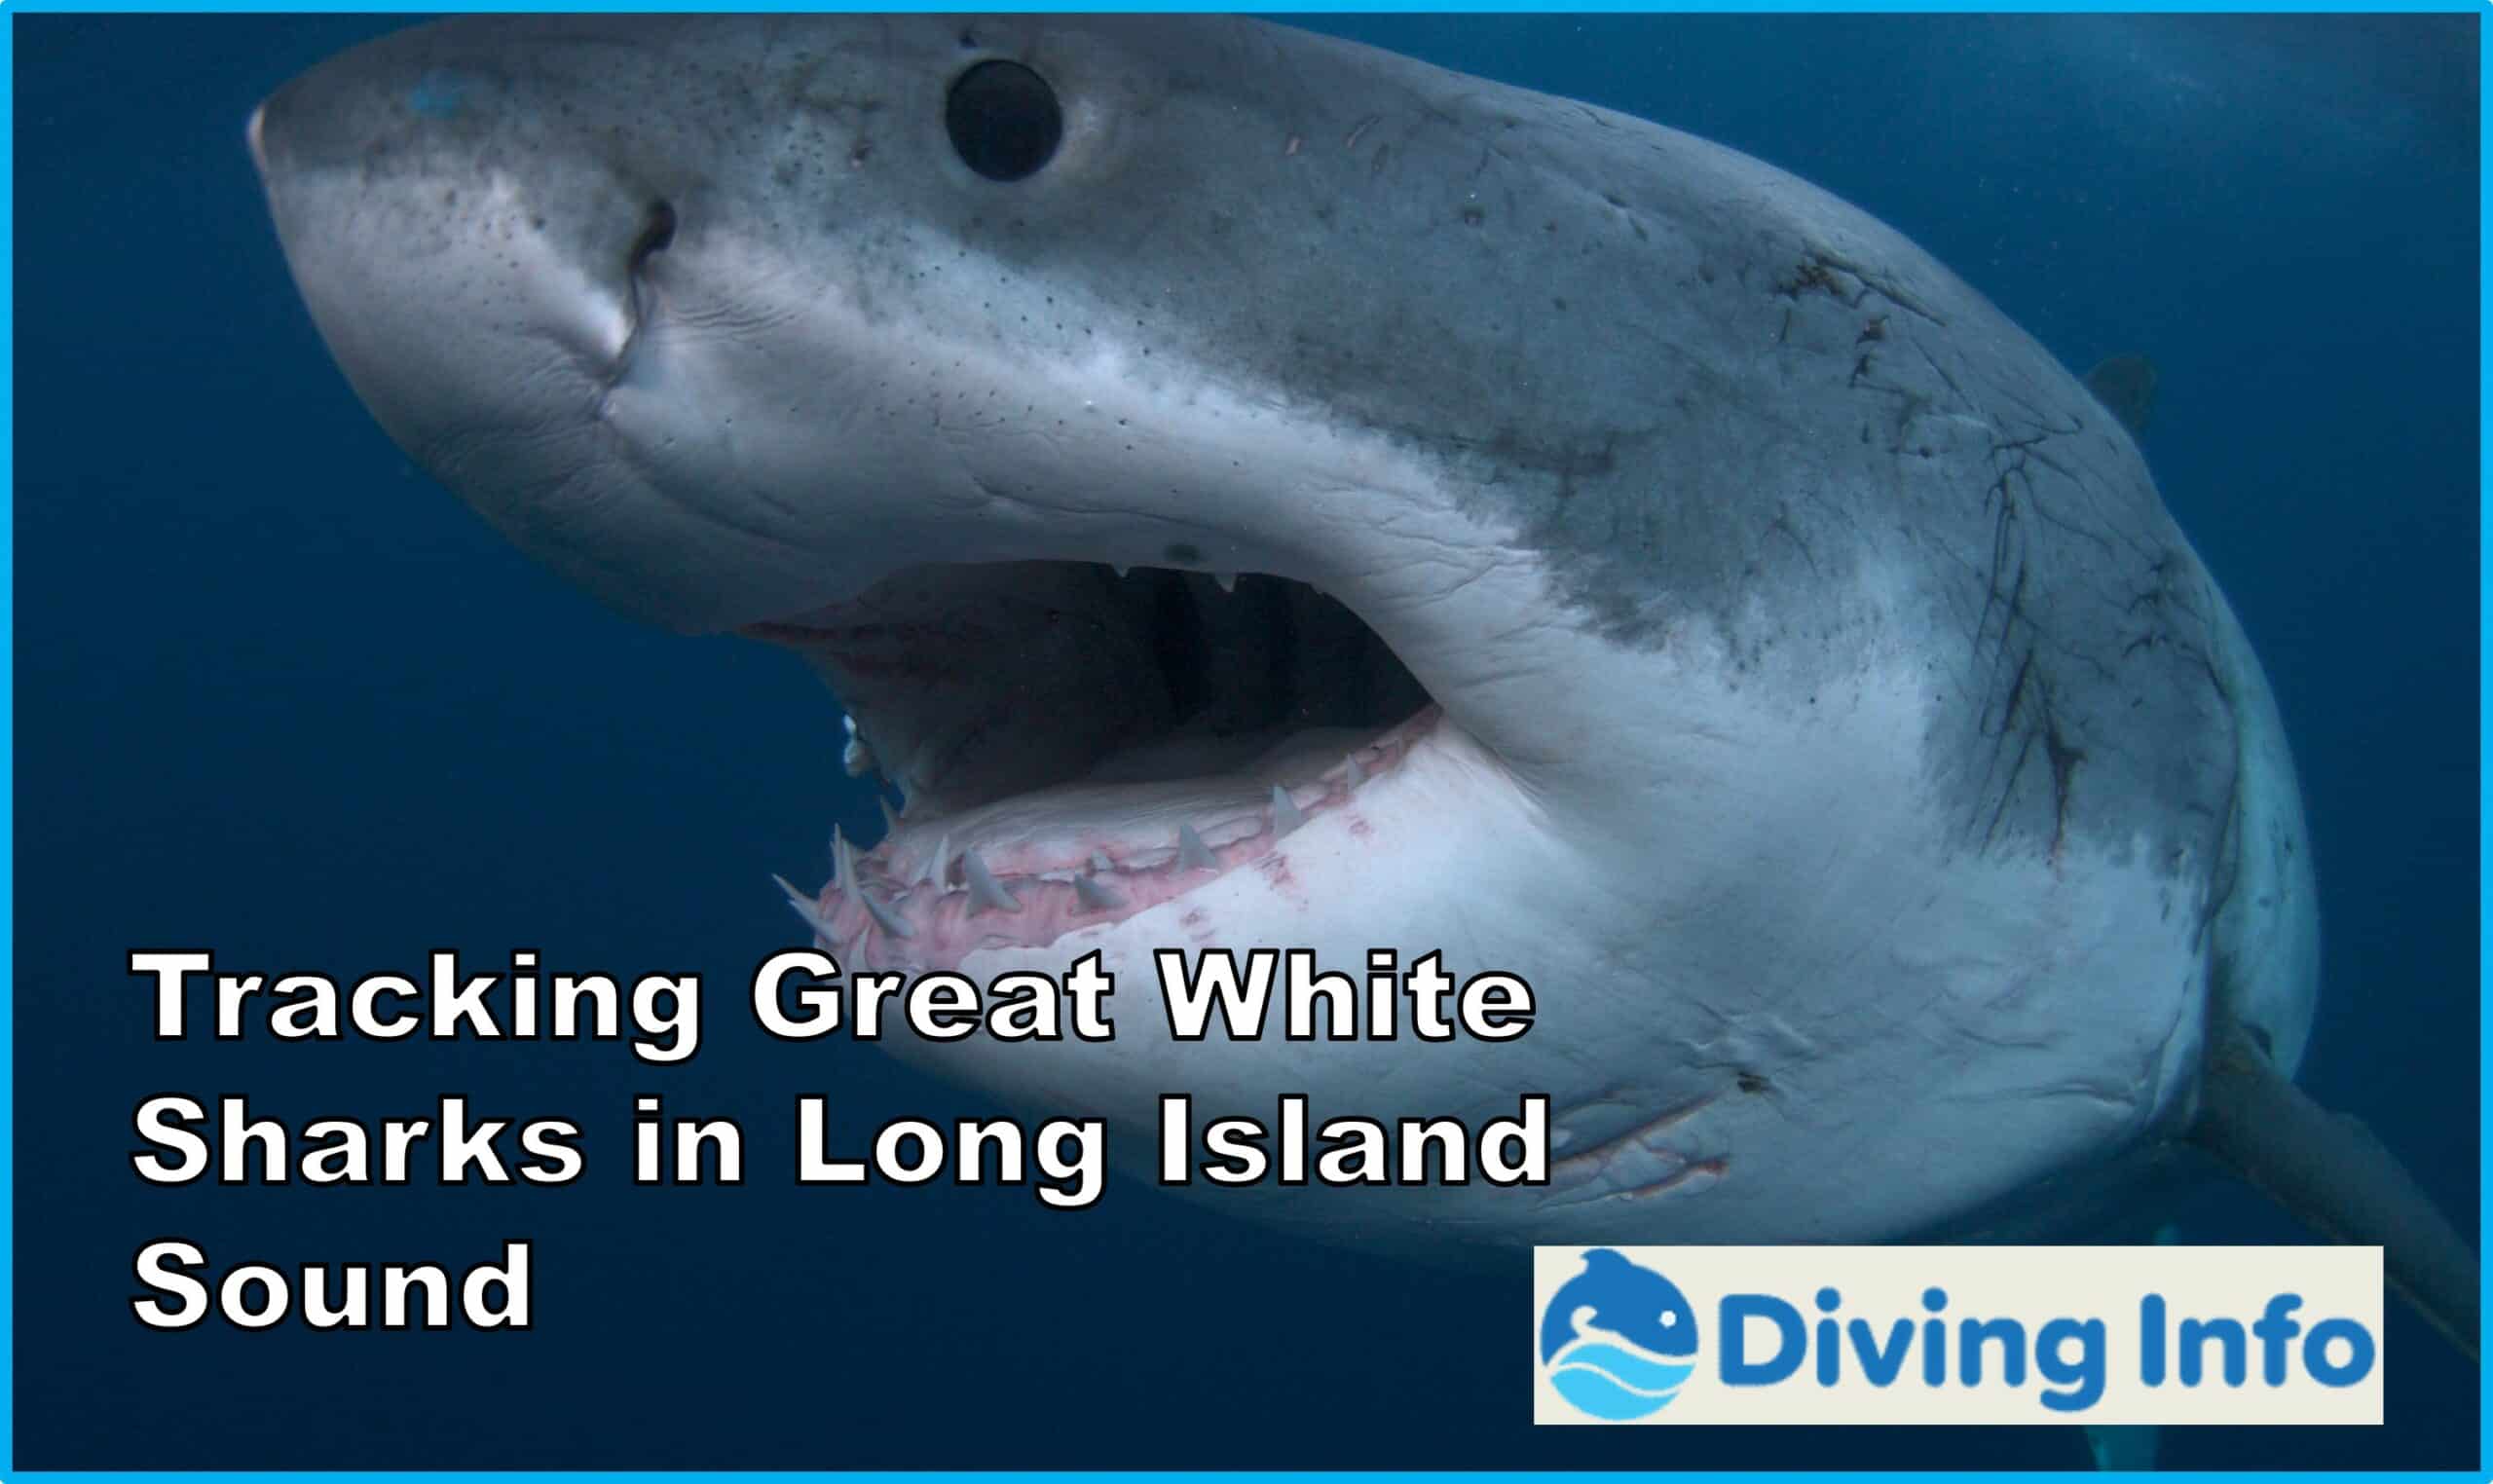 Tracking Great White Sharks in Long Island Sound